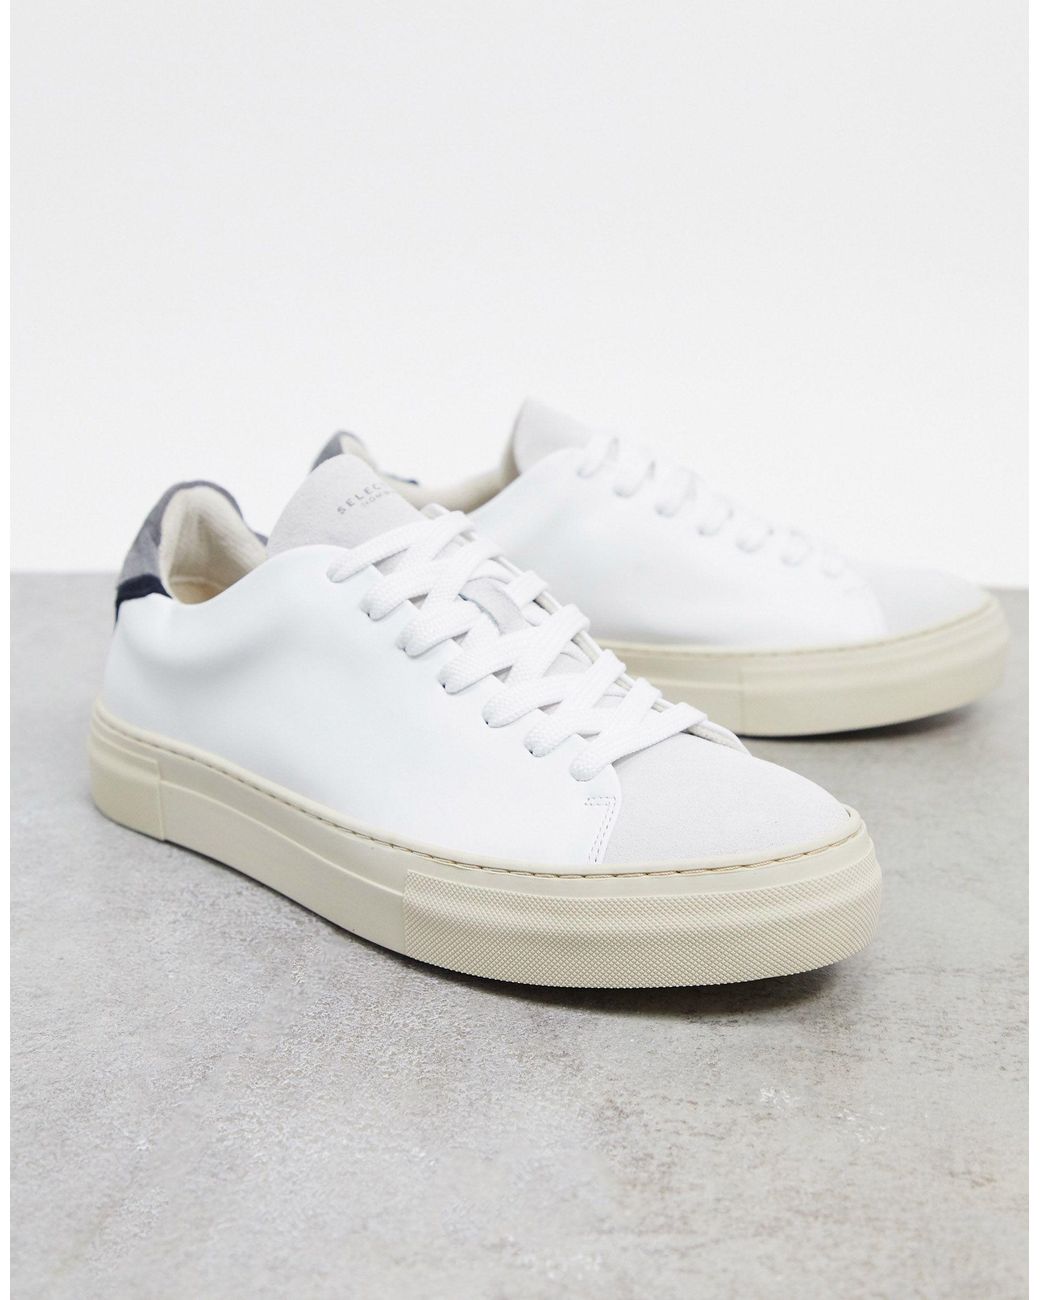 SELECTED Premium Leather Sneaker With Thick Sole in White for Men - Lyst